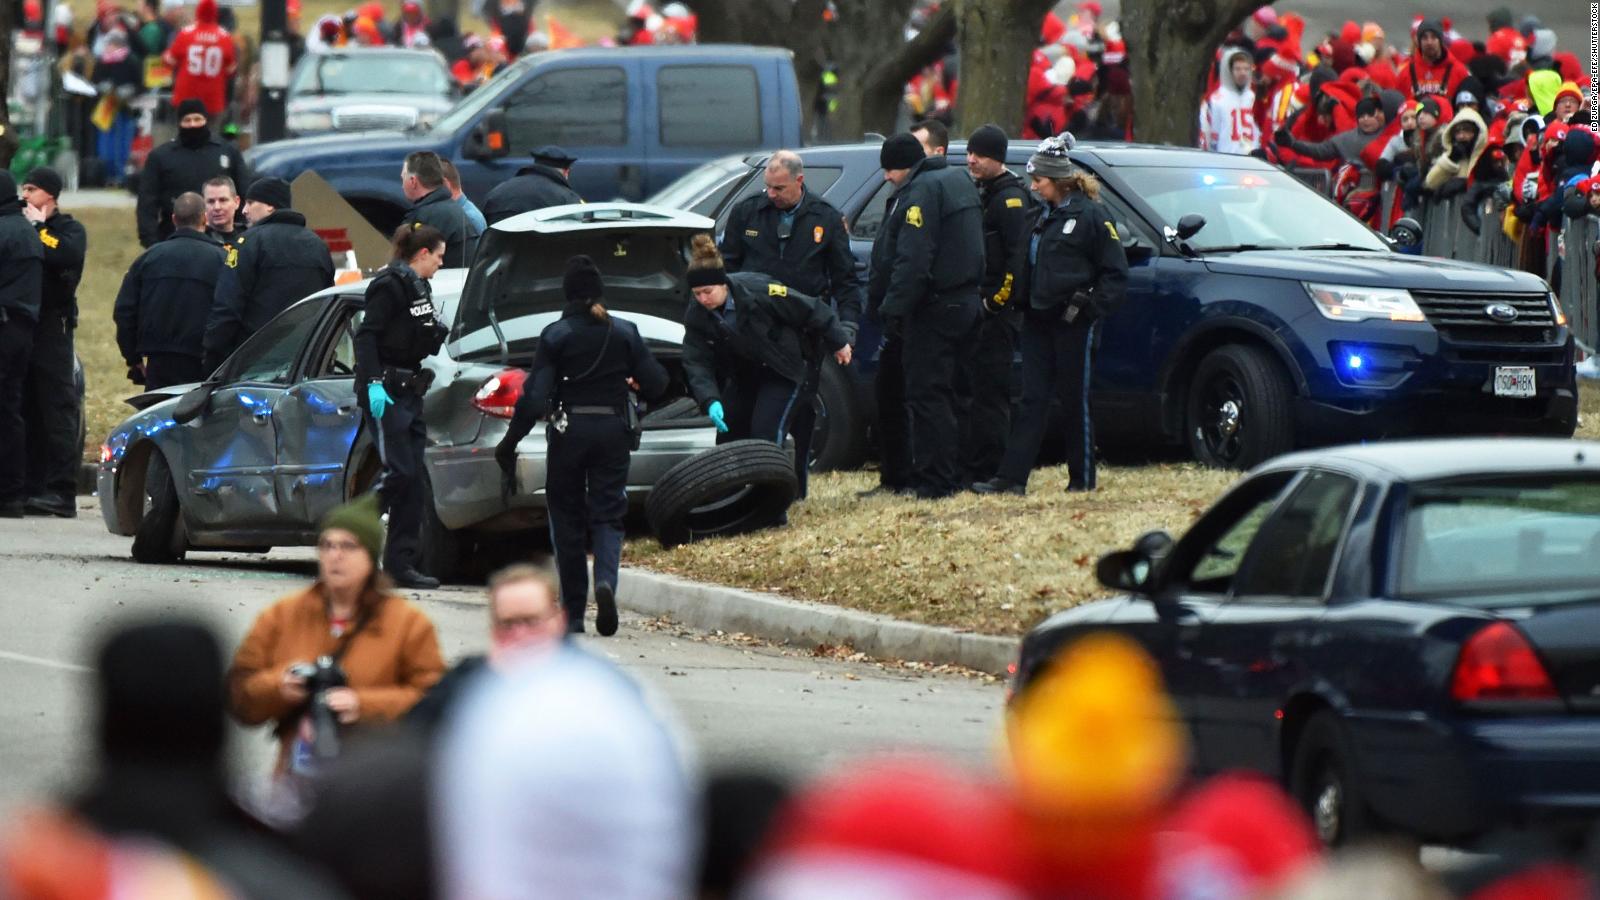 A chase along the Kansas City Chiefs' parade route ends with suspects